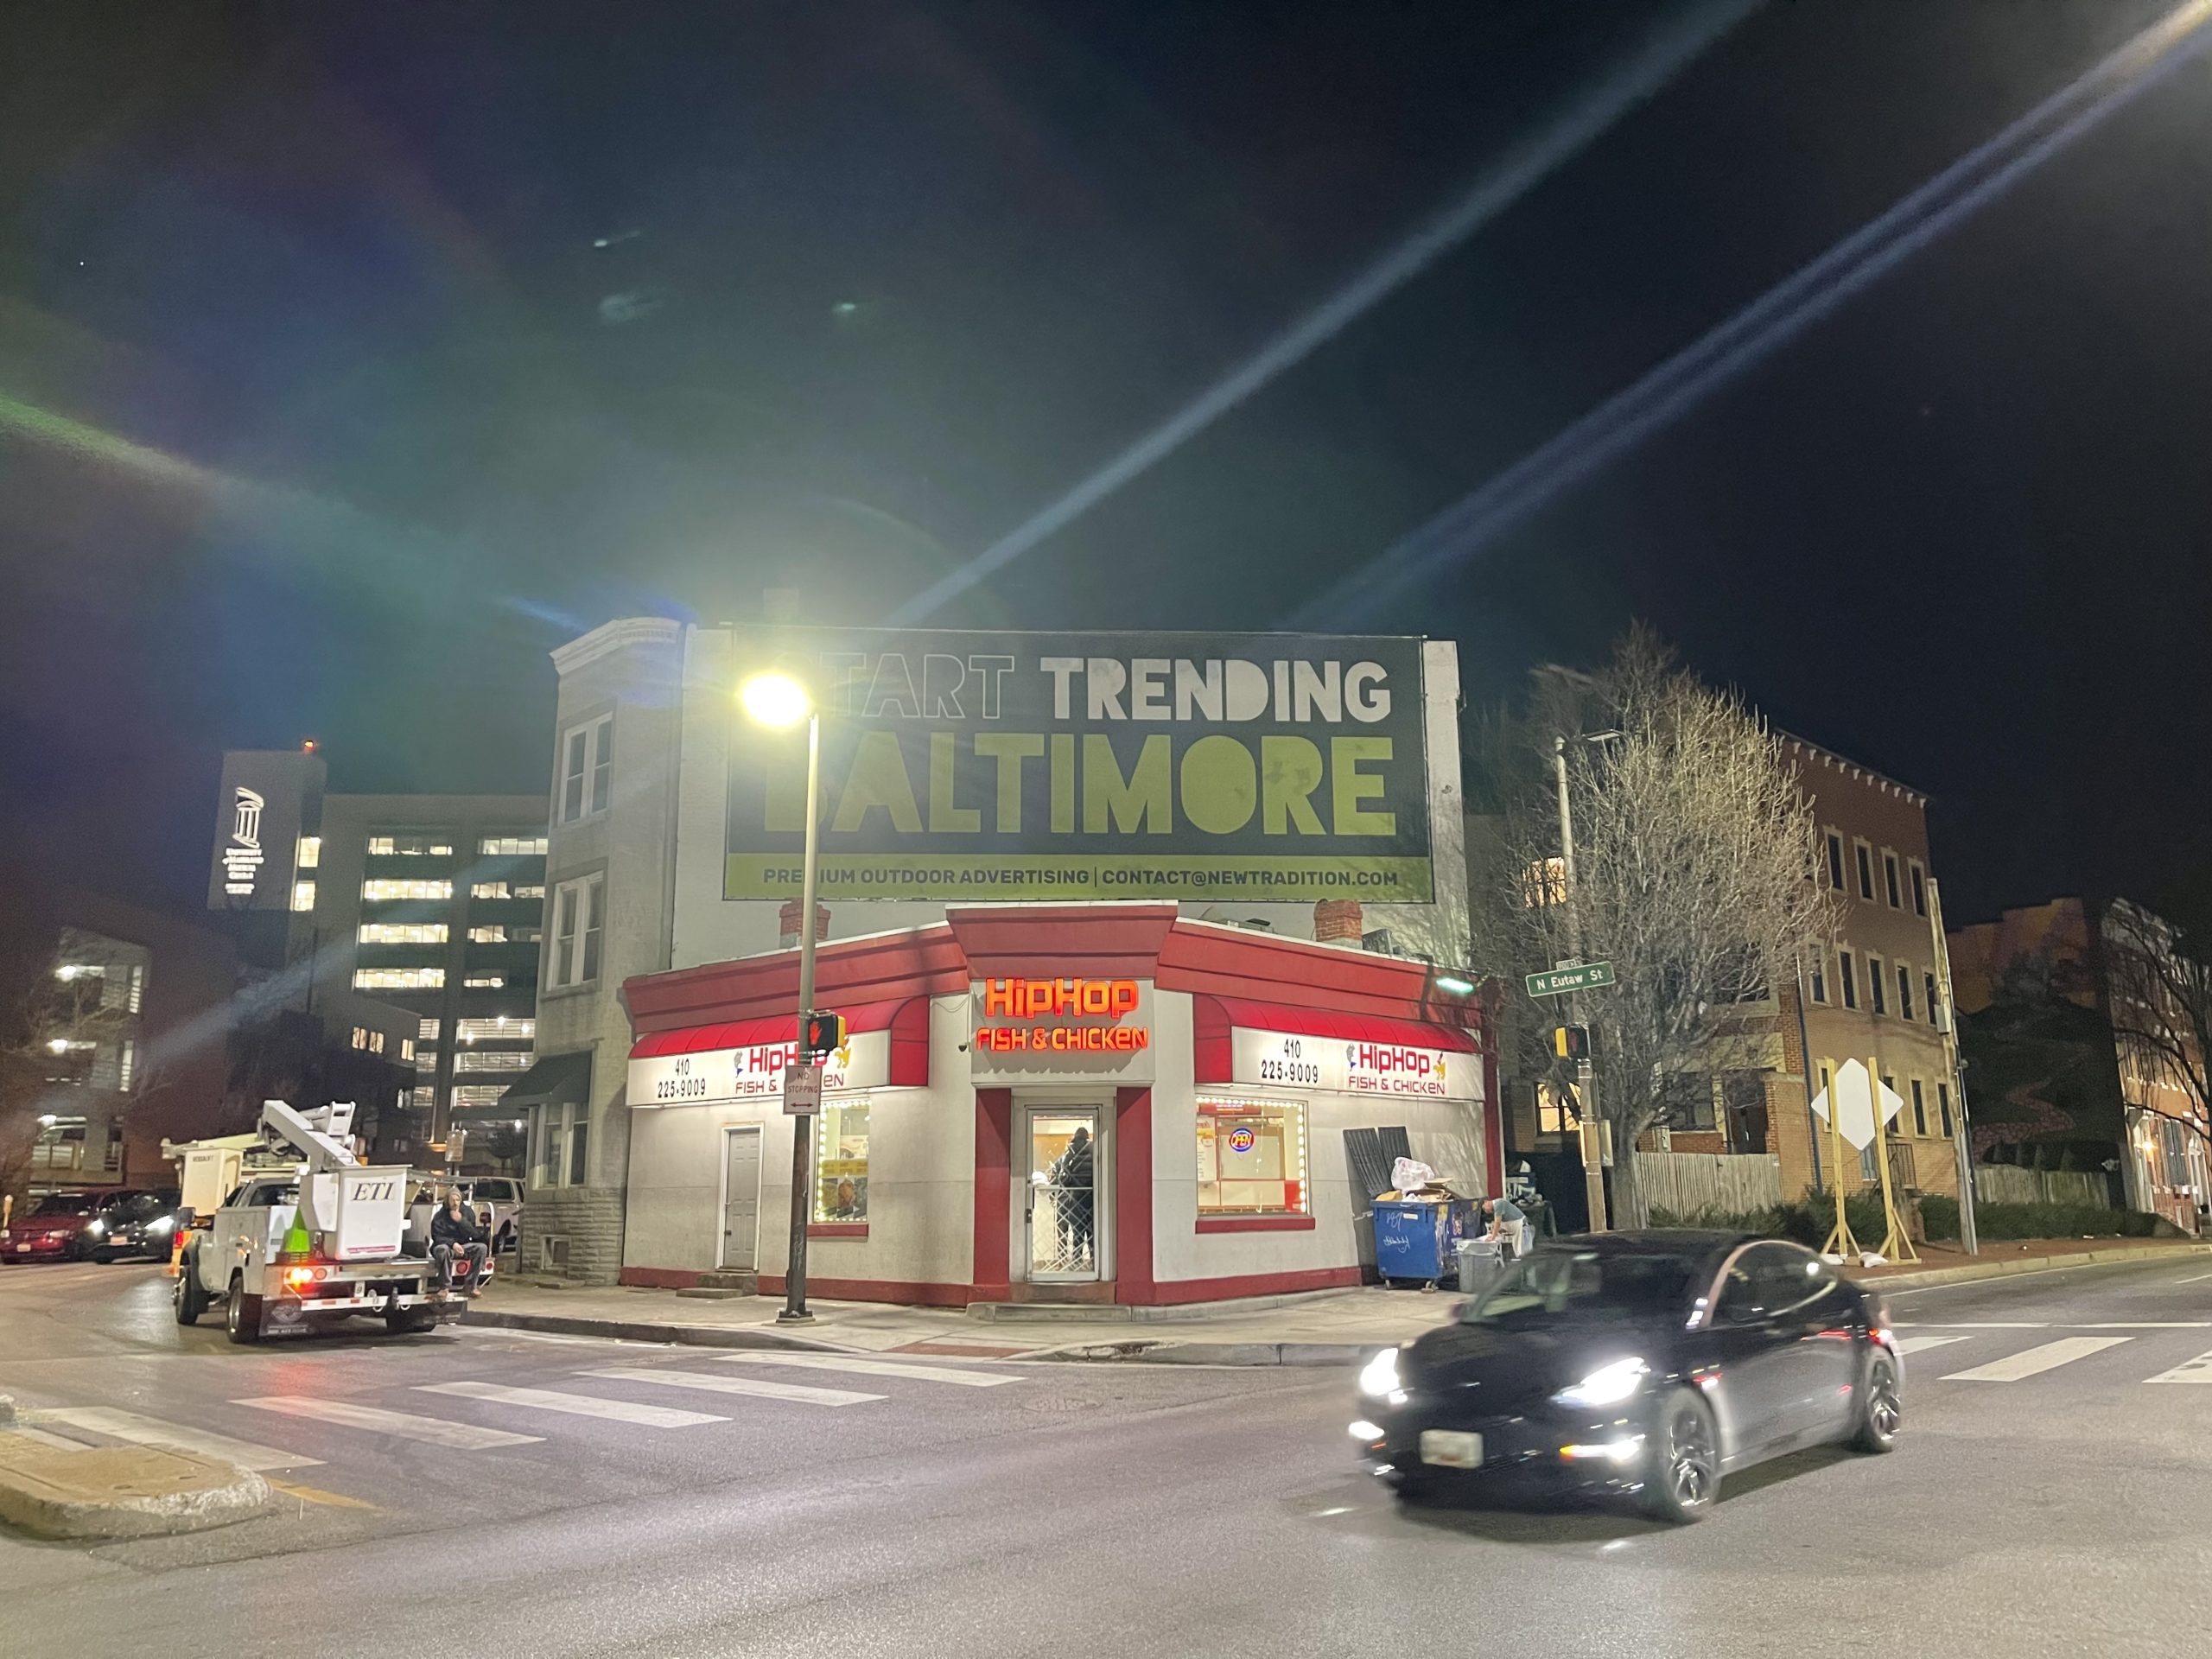 Baltimore-Signs-Graphics-16-x-40-lind-bannerframe-classic-banner-installation-scaled Is It Time Your Banners Start Trending?